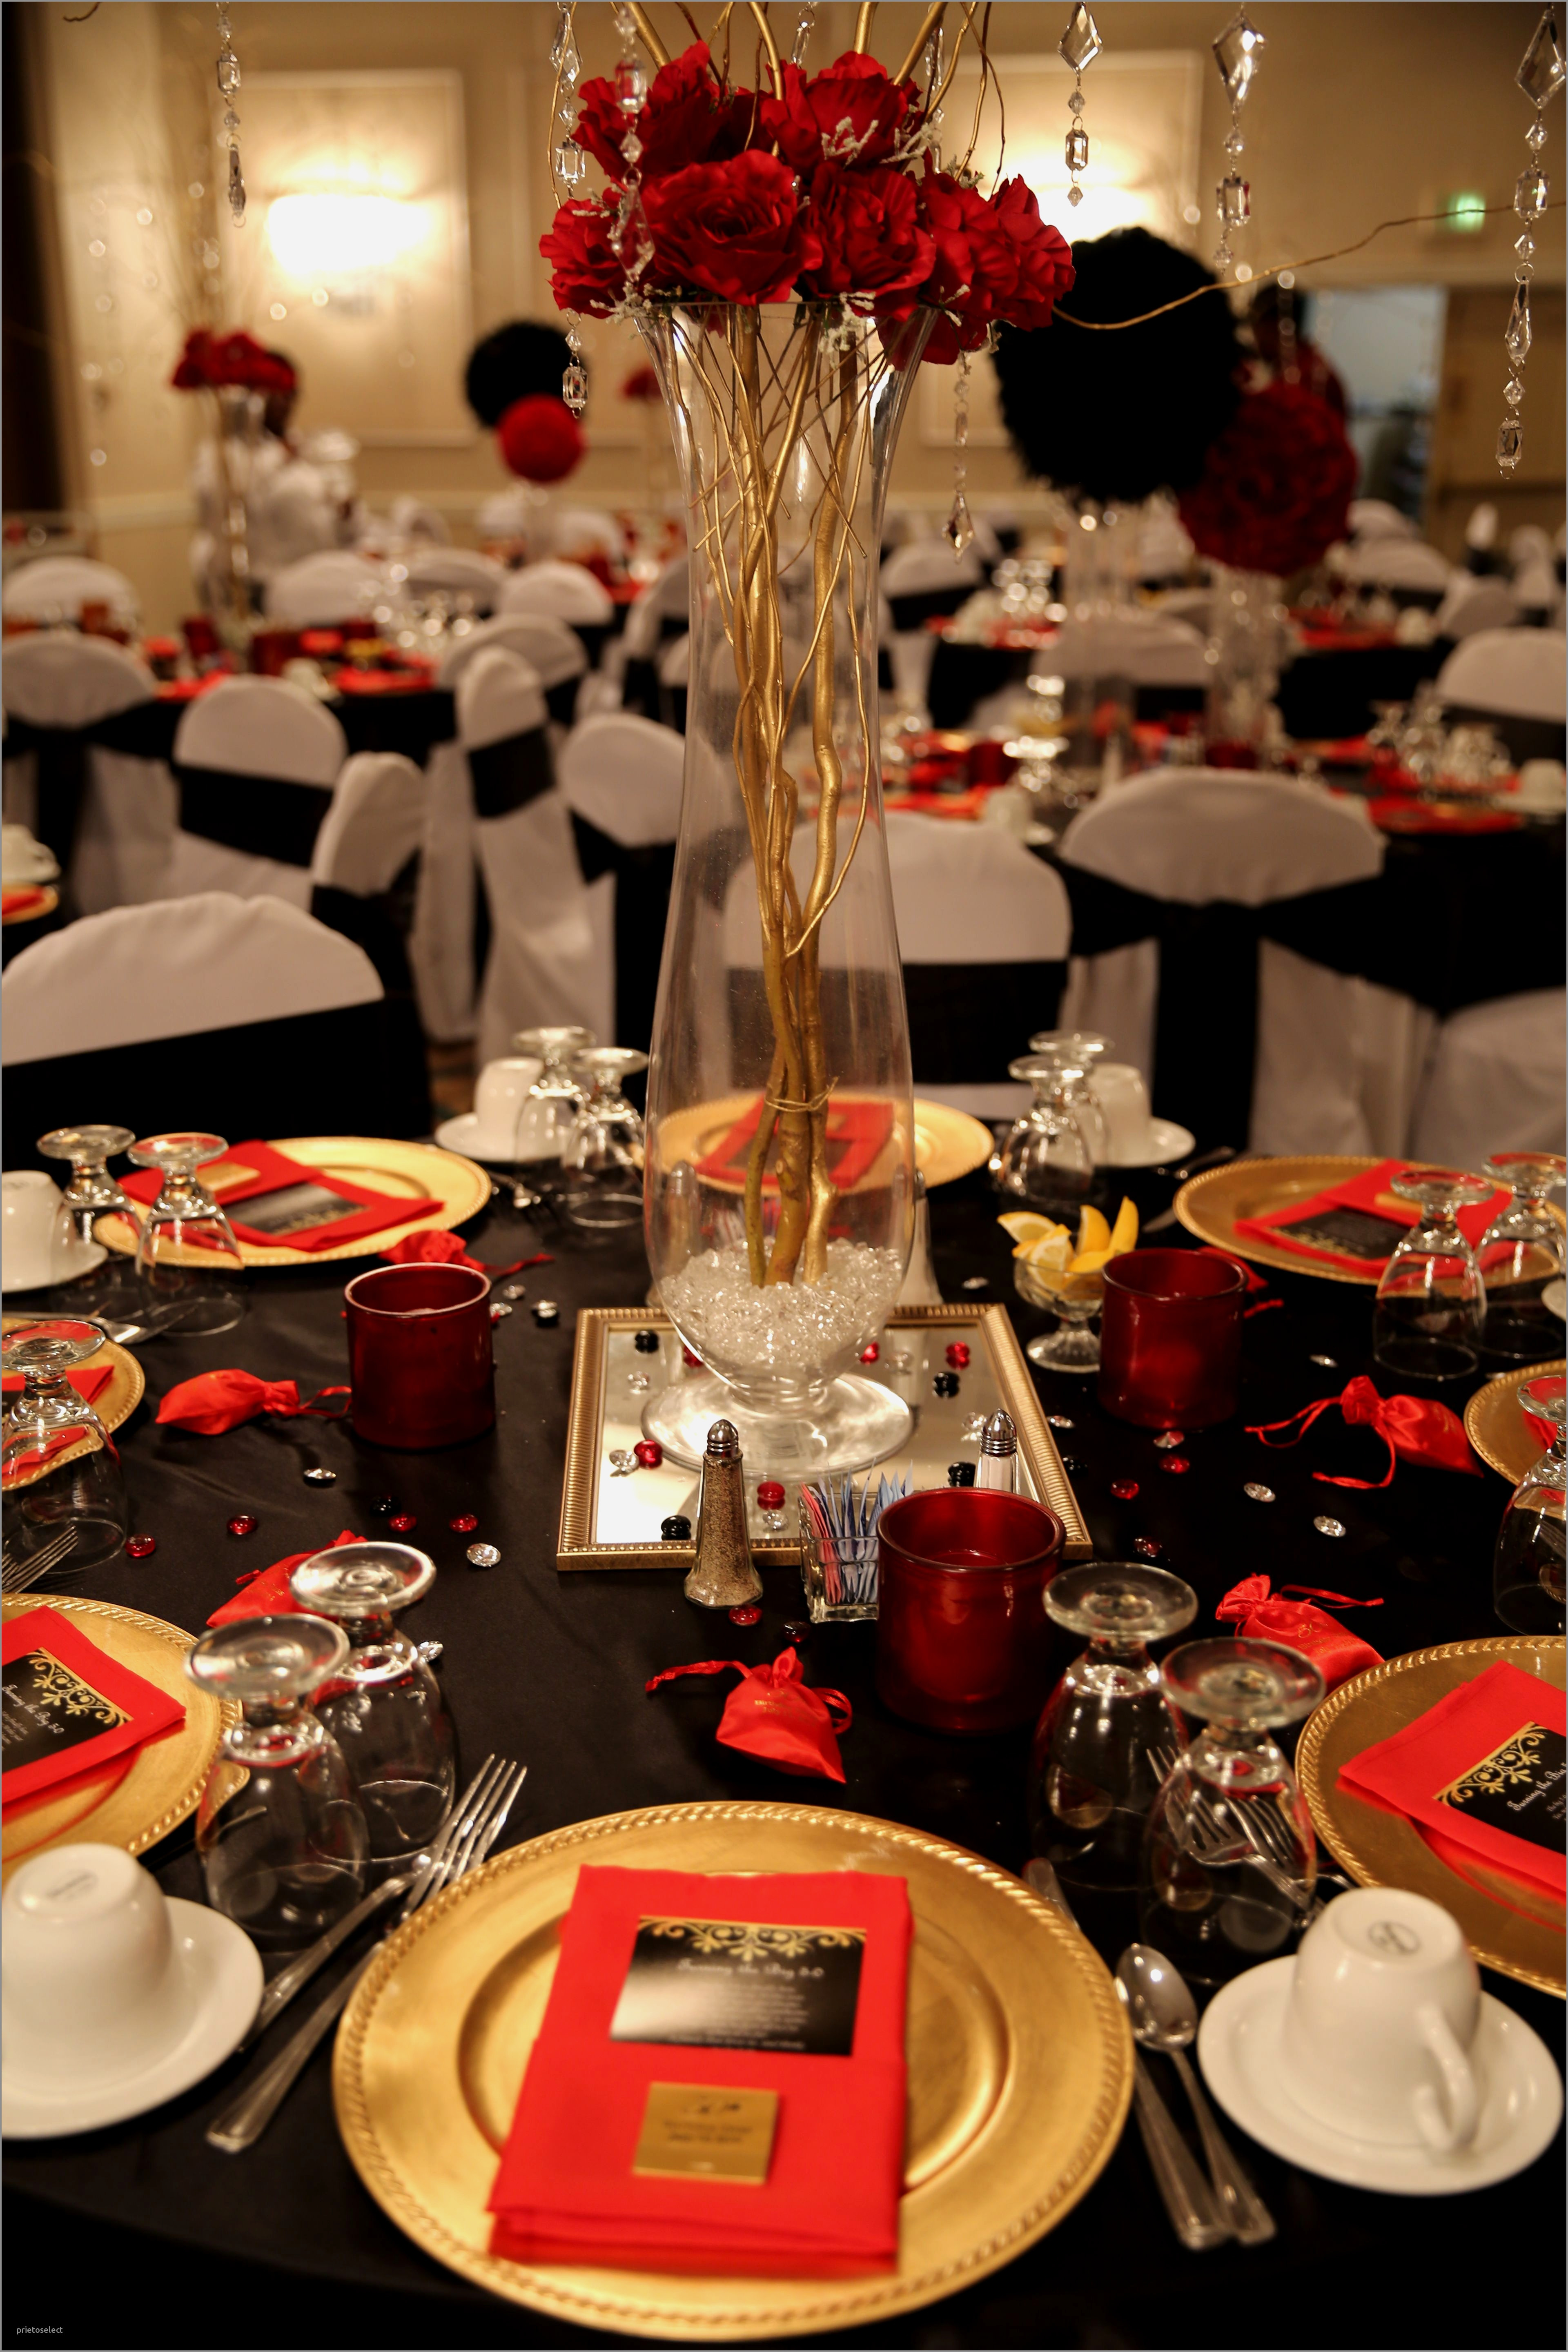 Red Vase Decoration Ideas Of 75th Birthday Table Decorations Awesome A¢ea 15 Cheap and Easy Diy within 75th Birthday Table Decorations Best Of Red Black and Gold Table Decorations for 50th Birthday Party